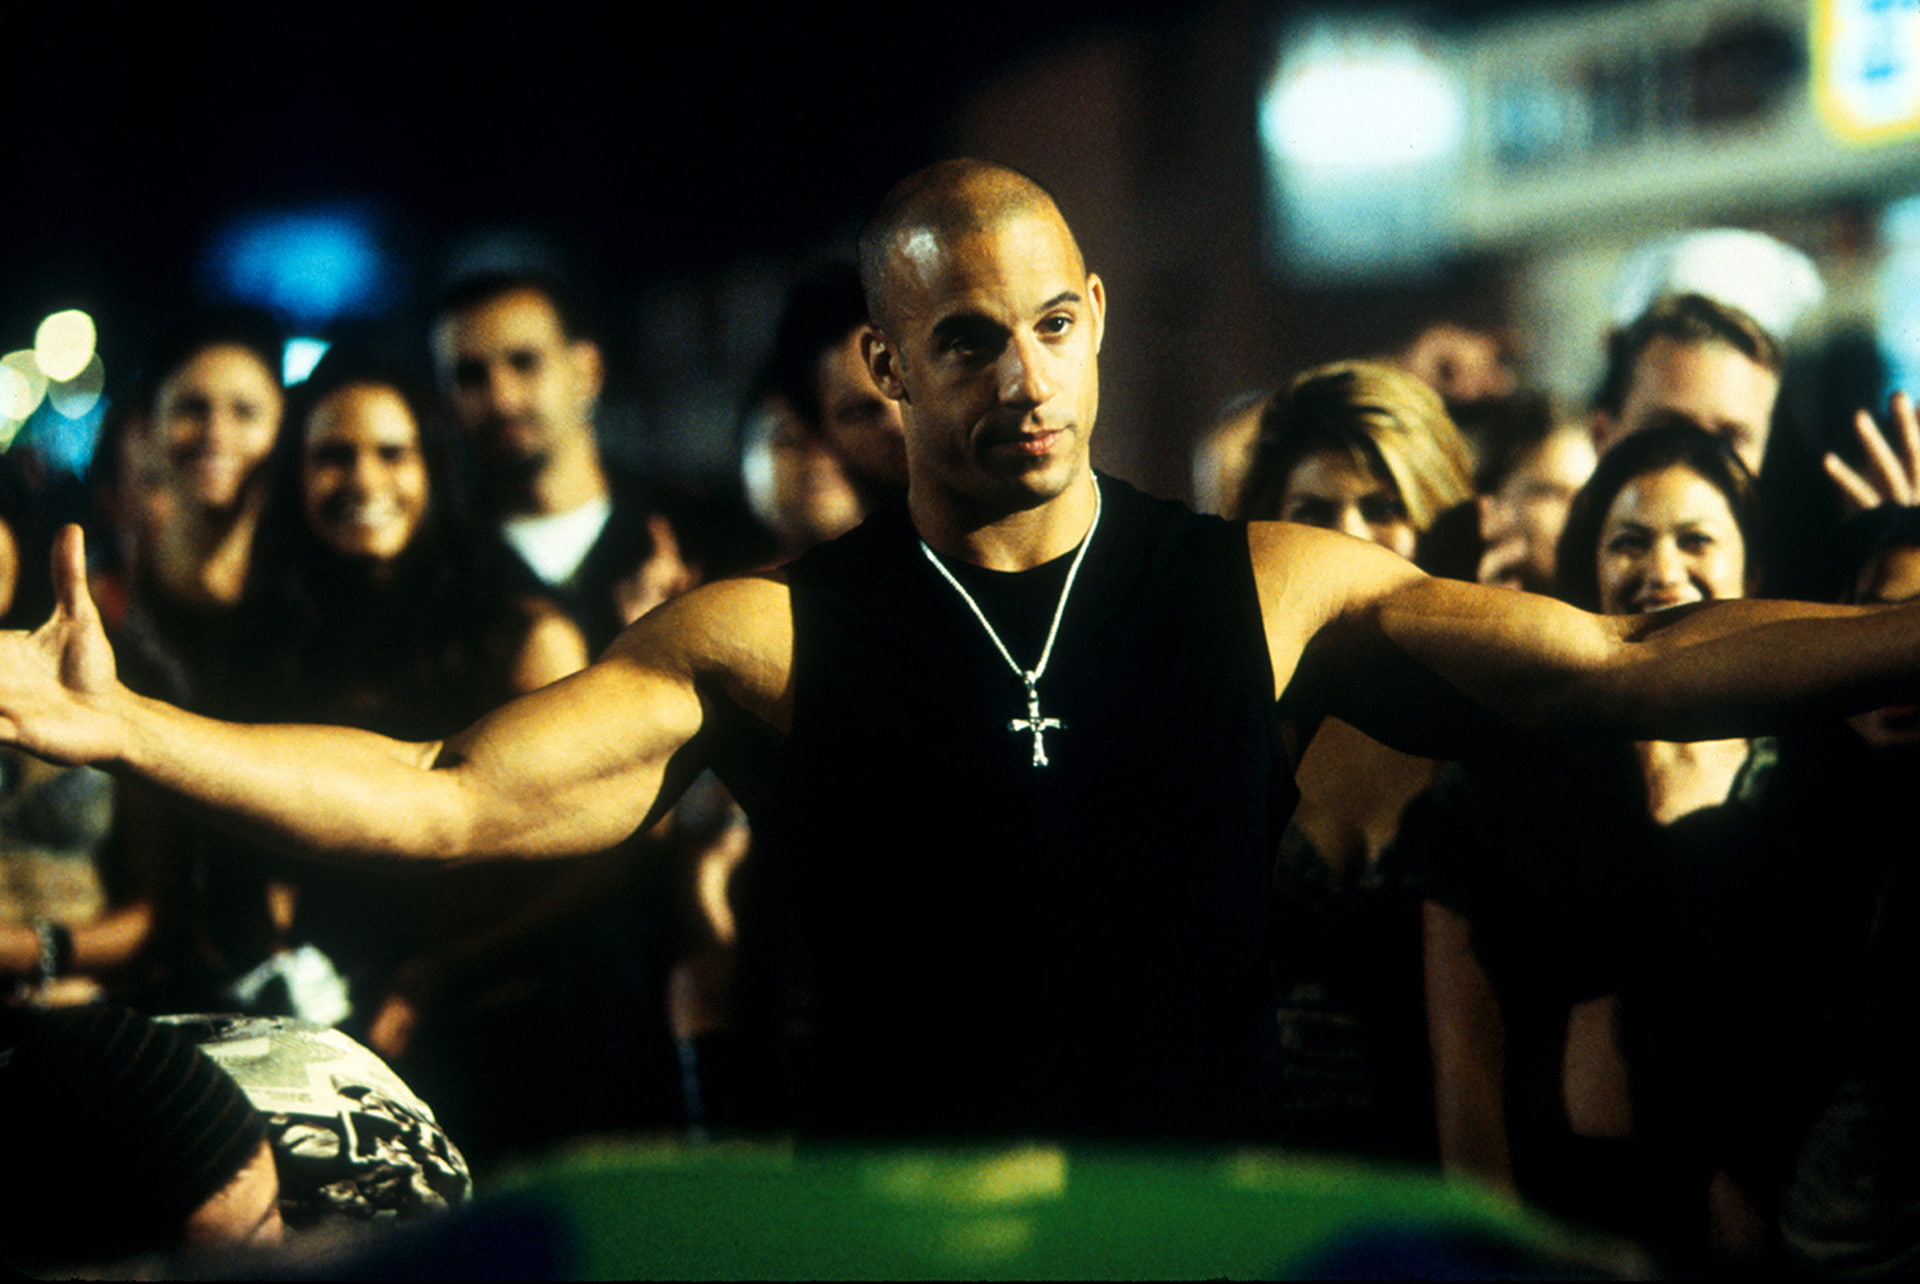 VIN Diesel, The Fast and the Furious, Dominic Toretto